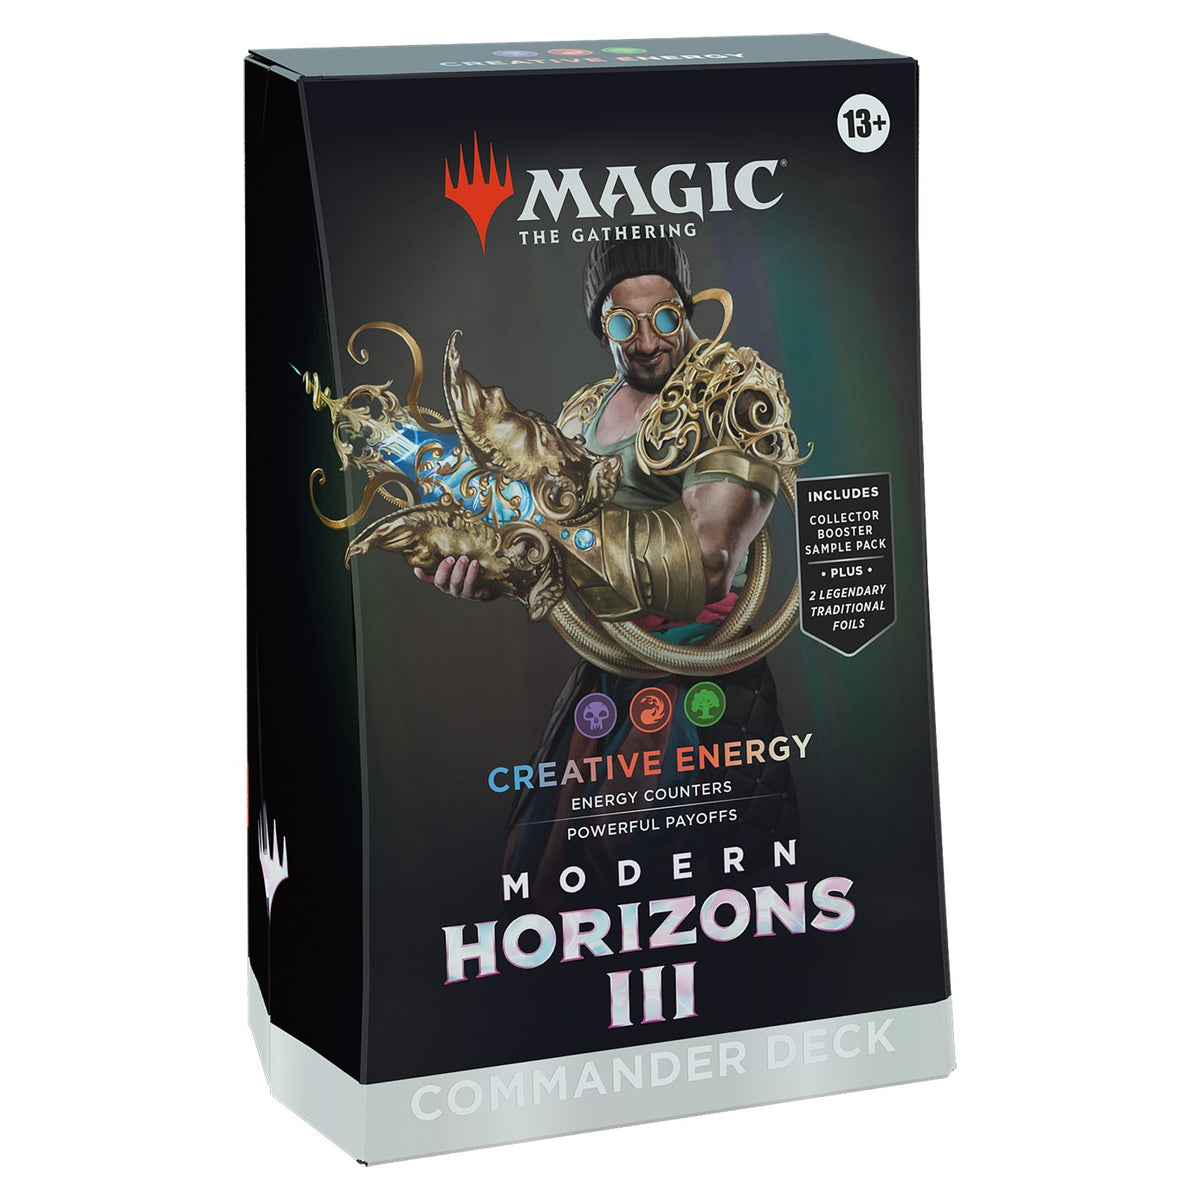 Magic The Gathering - Modern Horizons 3 Commander Deck Set Magic The Gathering Wizards of the Coast   